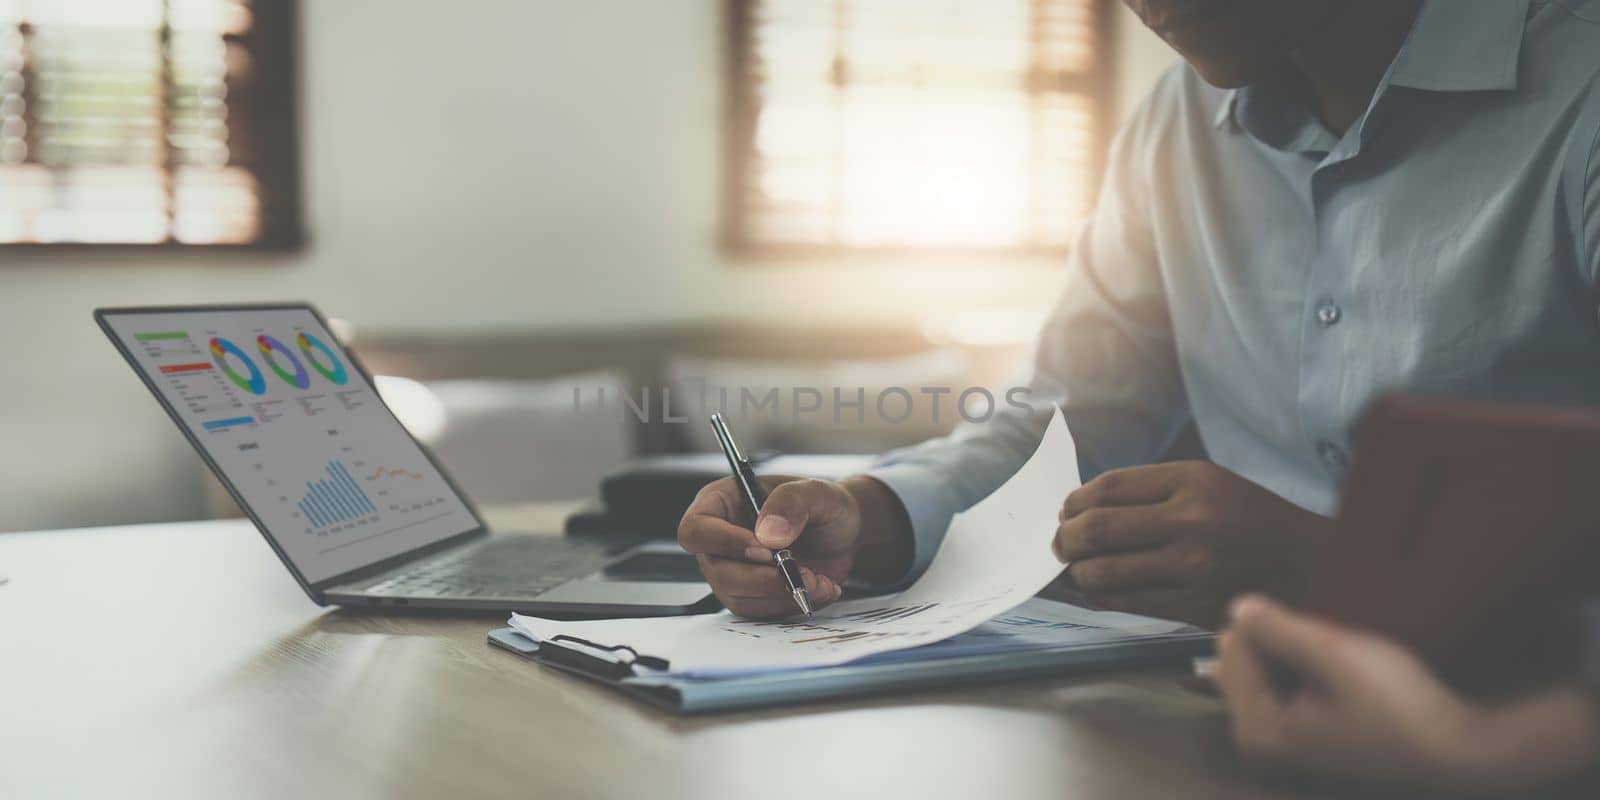 Financial analyst analyzes business people investment consultant analyzing company financial report working with documents graphs. Stock Market Tax Fund Finance concept